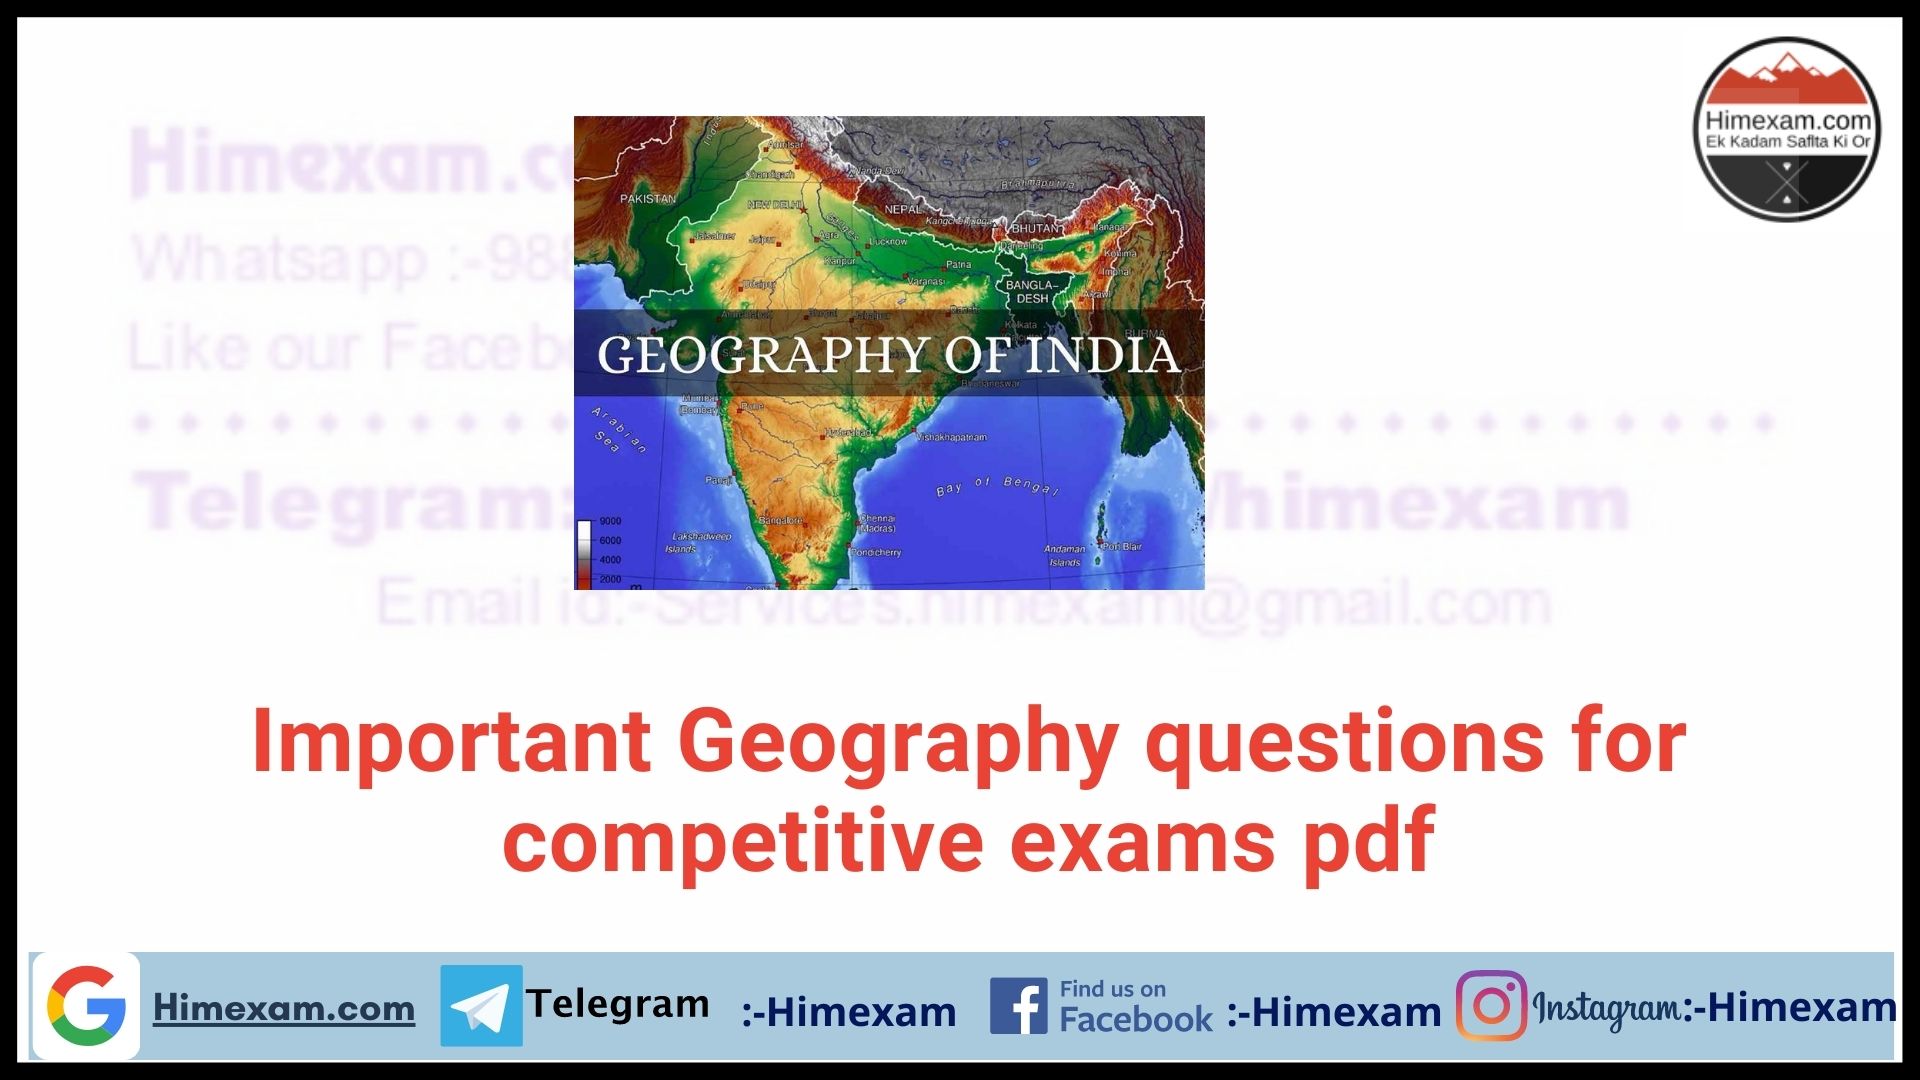 Important Geography questions for competitive exams pdf